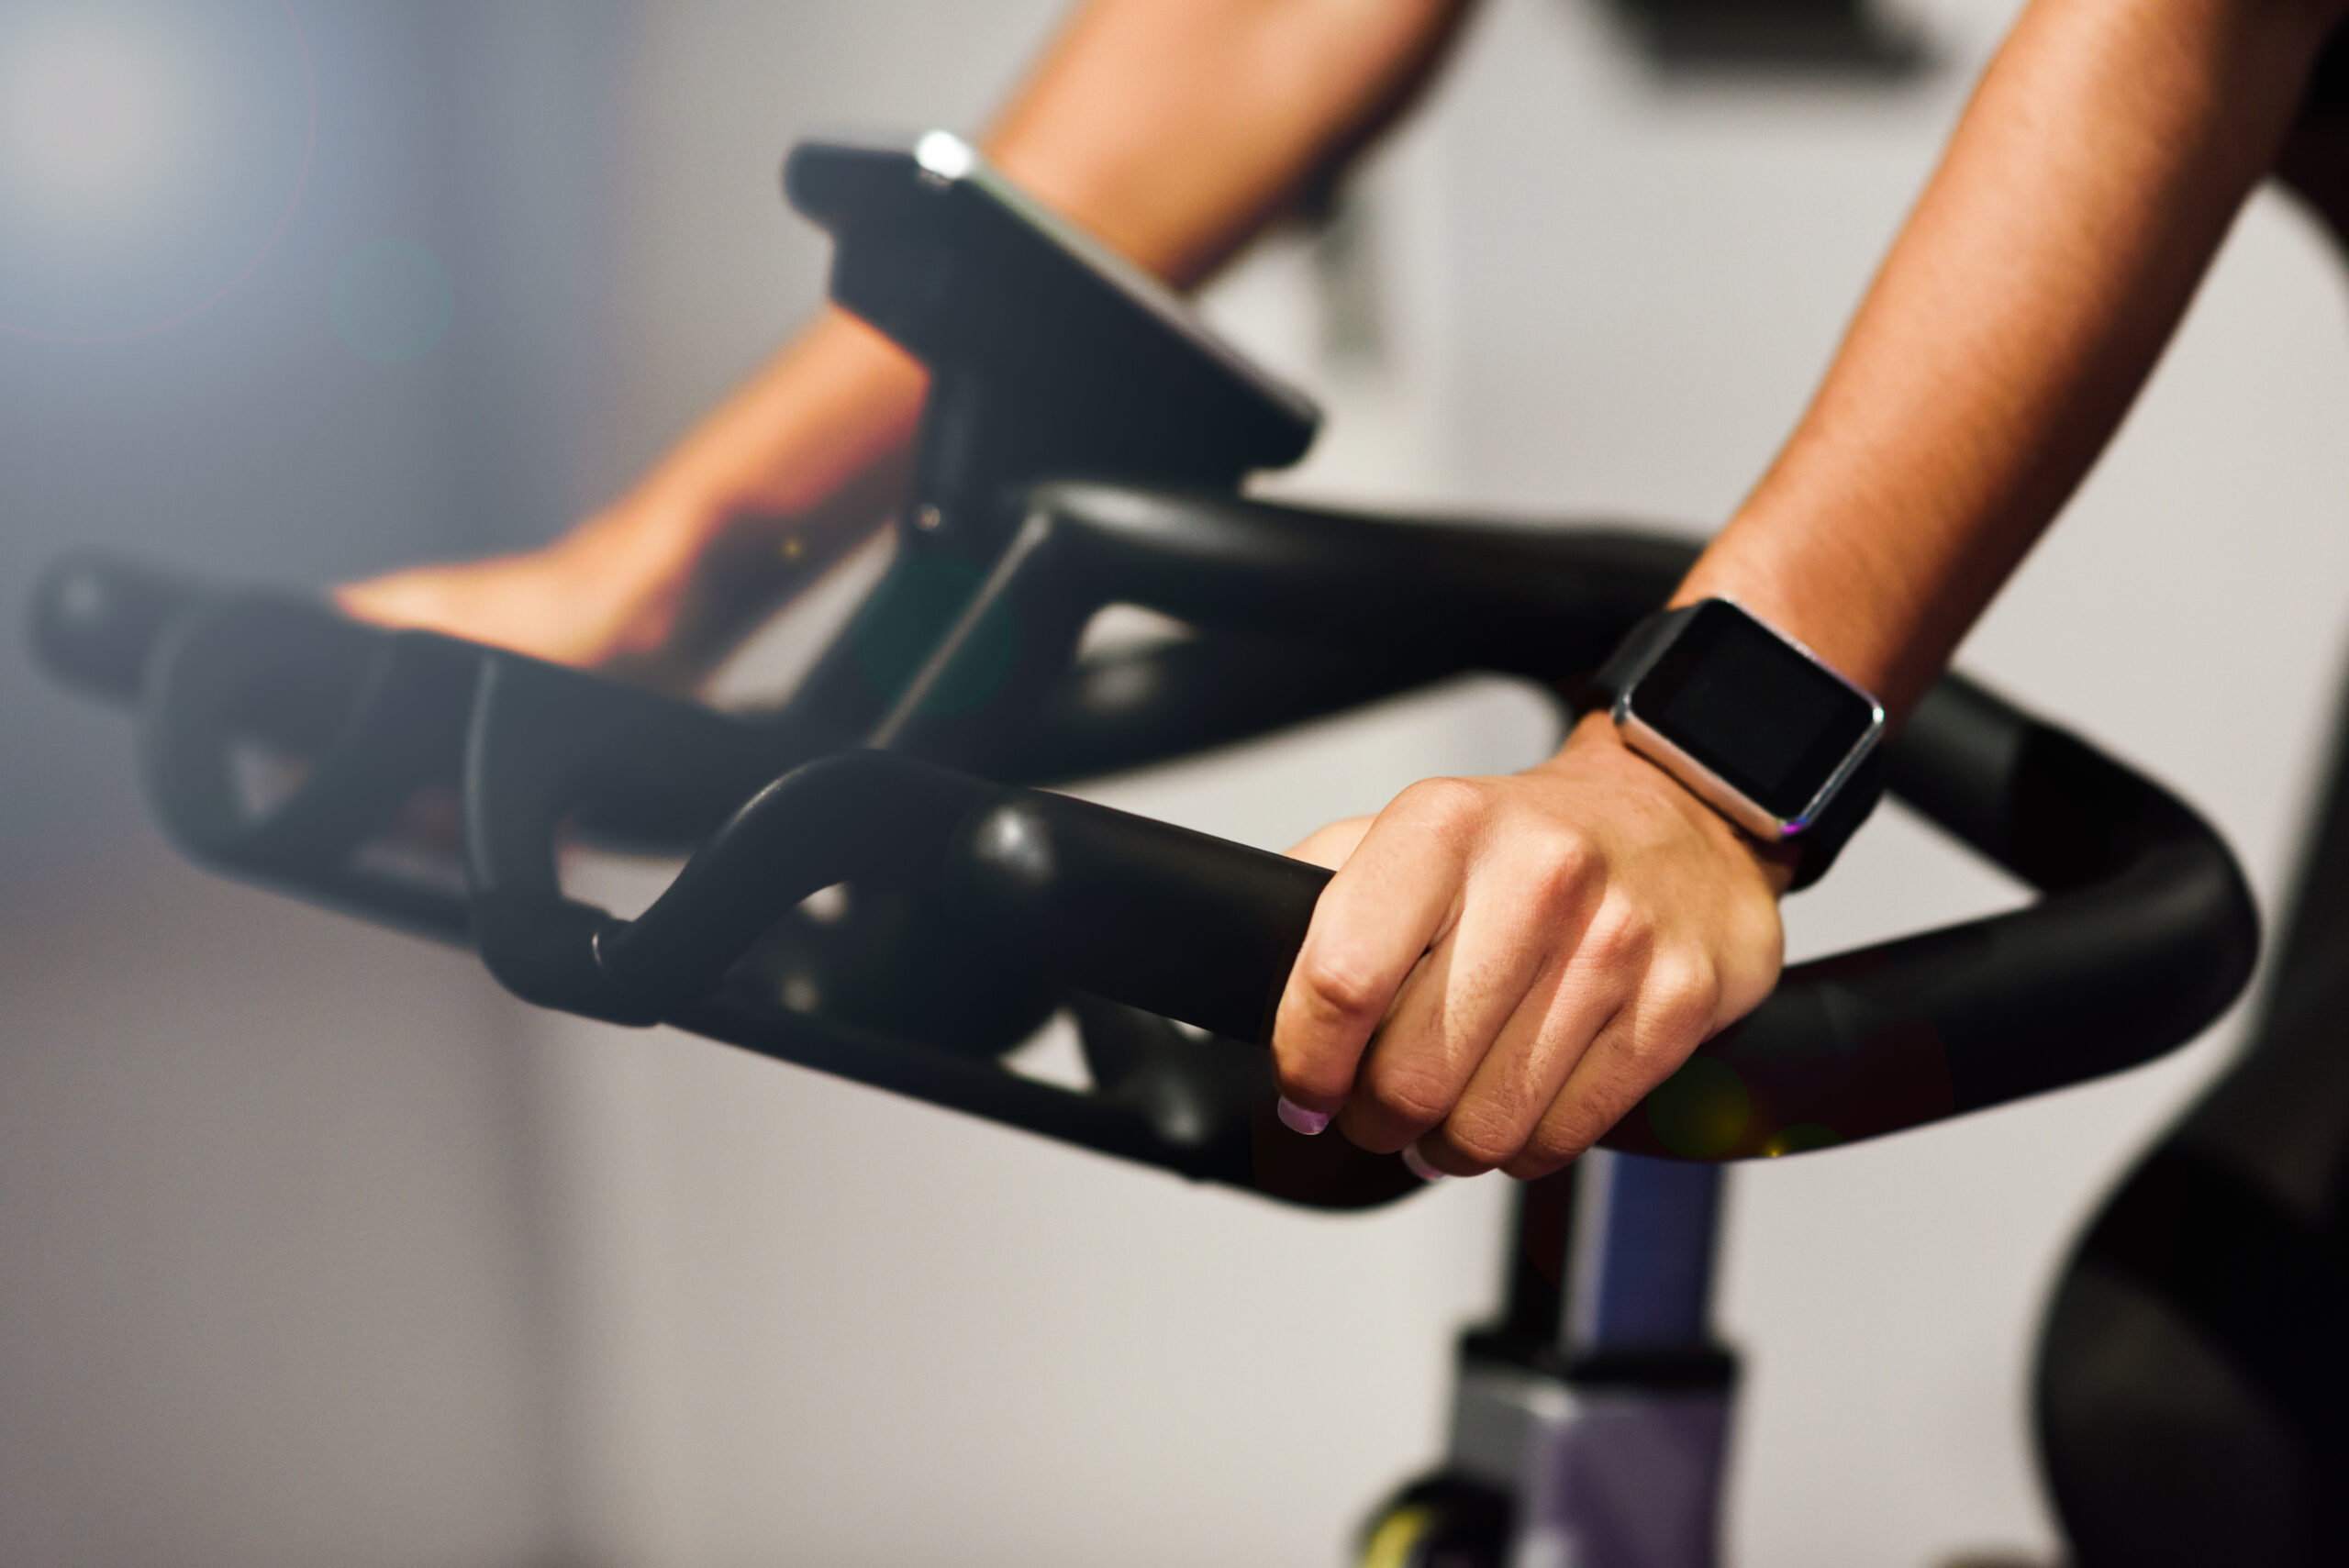 Hands of a woman training at a gym doing spinning or cyclo indoor with smart watch. Sports and fitness concept.